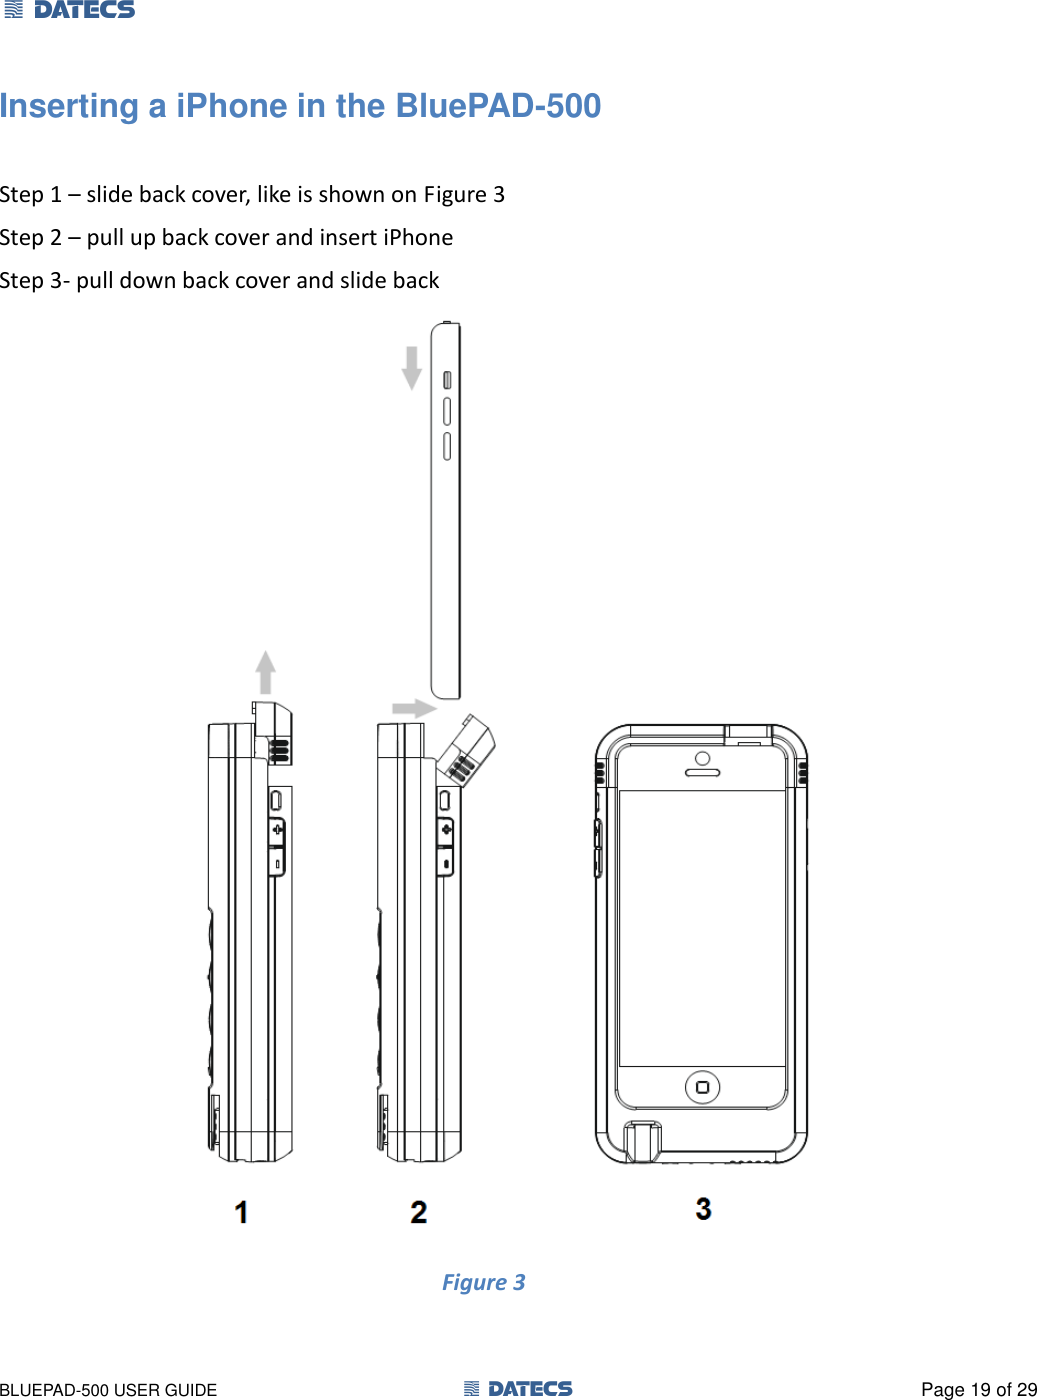 1 DATECS       BLUEPAD-500 USER GUIDE  1 DATECS  Page 19 of 29 Inserting a iPhone in the BluePAD-500  Step 1 – slide back cover, like is shown on Figure 3 Step 2 – pull up back cover and insert iPhone  Step 3- pull down back cover and slide back  Figure 3                                  